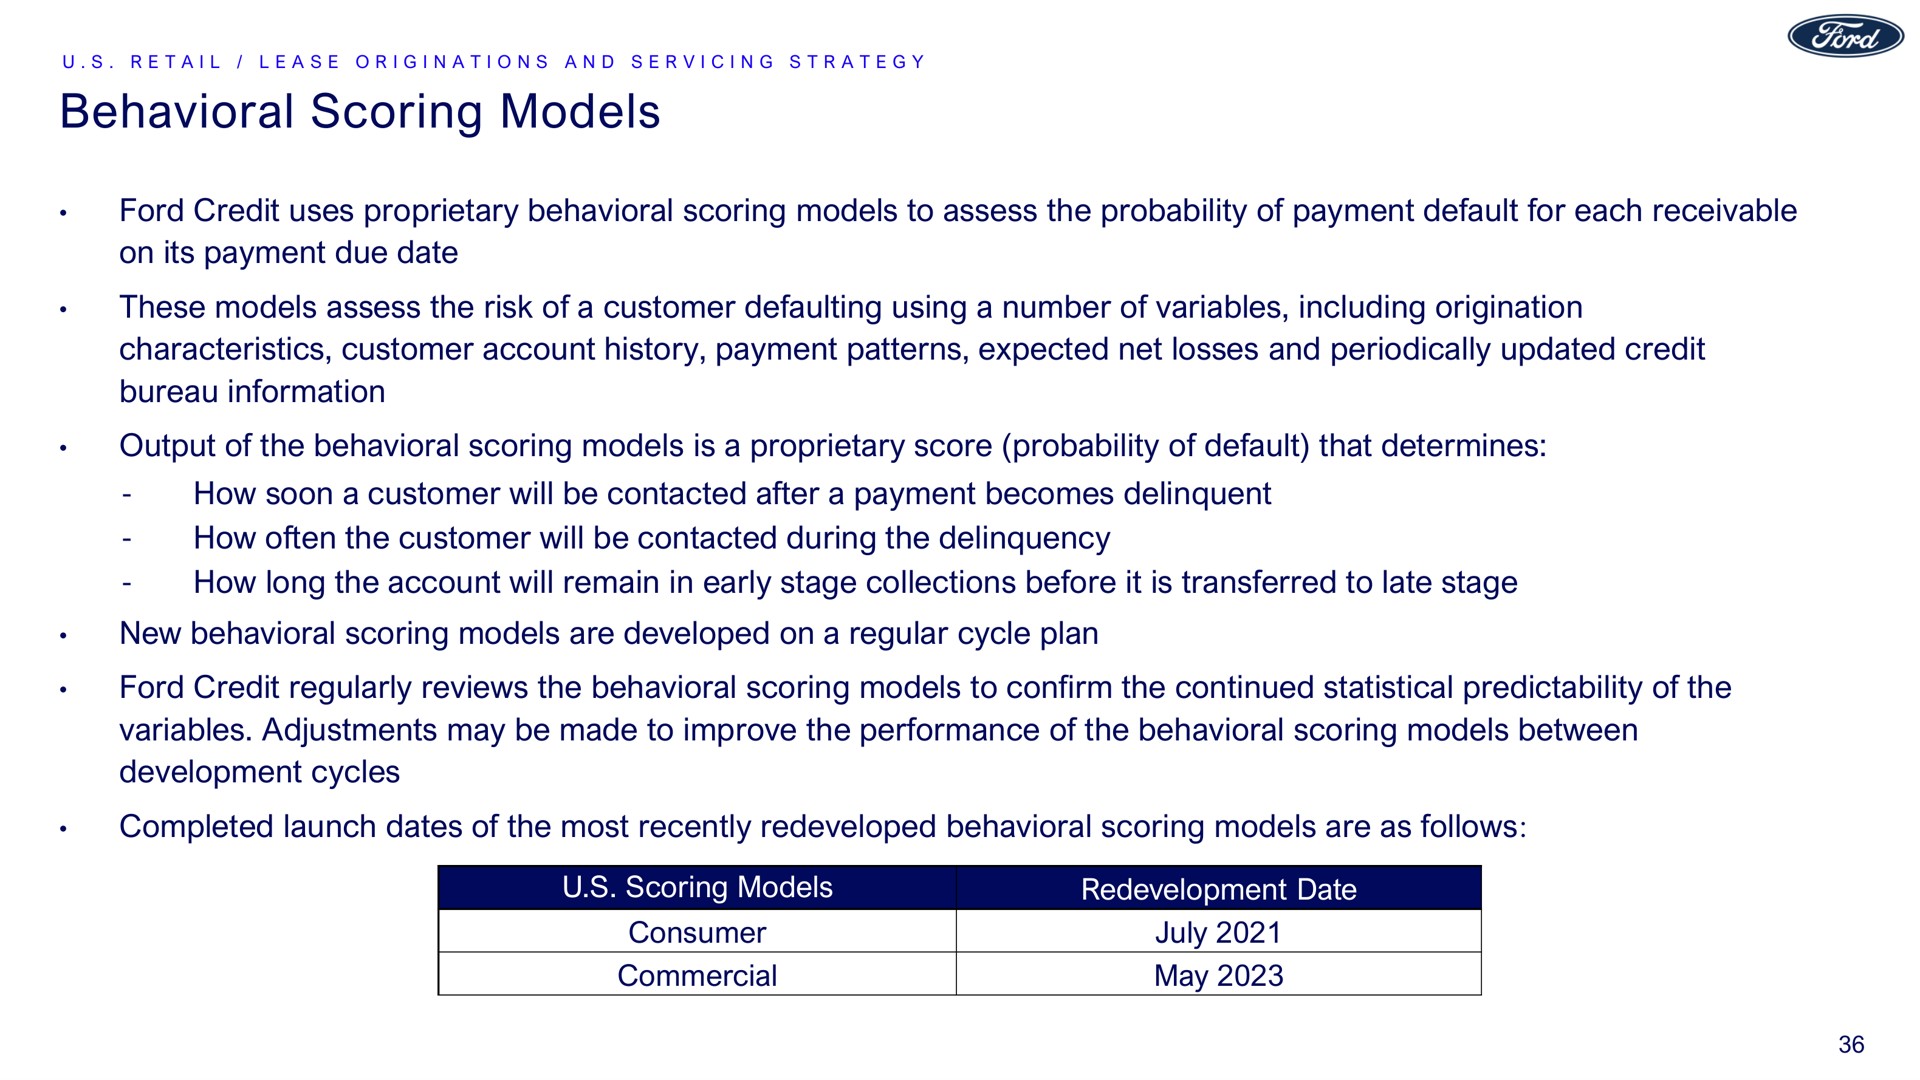 behavioral scoring models ford credit uses proprietary behavioral scoring models to assess the probability of payment default for each receivable on its payment due date these models assess the risk of a customer defaulting using a number of variables including origination characteristics customer account history payment patterns expected net losses and periodically updated credit bureau information output of the behavioral scoring models is a proprietary score probability of default that determines how soon a customer will be contacted after a payment becomes delinquent how often the customer will be contacted during the delinquency how long the account will remain in early stage collections before it is transferred to late stage new behavioral scoring models are developed on a regular cycle plan ford credit regularly reviews the behavioral scoring models to confirm the continued statistical predictability of the variables adjustments may be made to improve the performance of the behavioral scoring models between development cycles completed launch dates of the most recently redeveloped behavioral scoring models are as follows | Ford